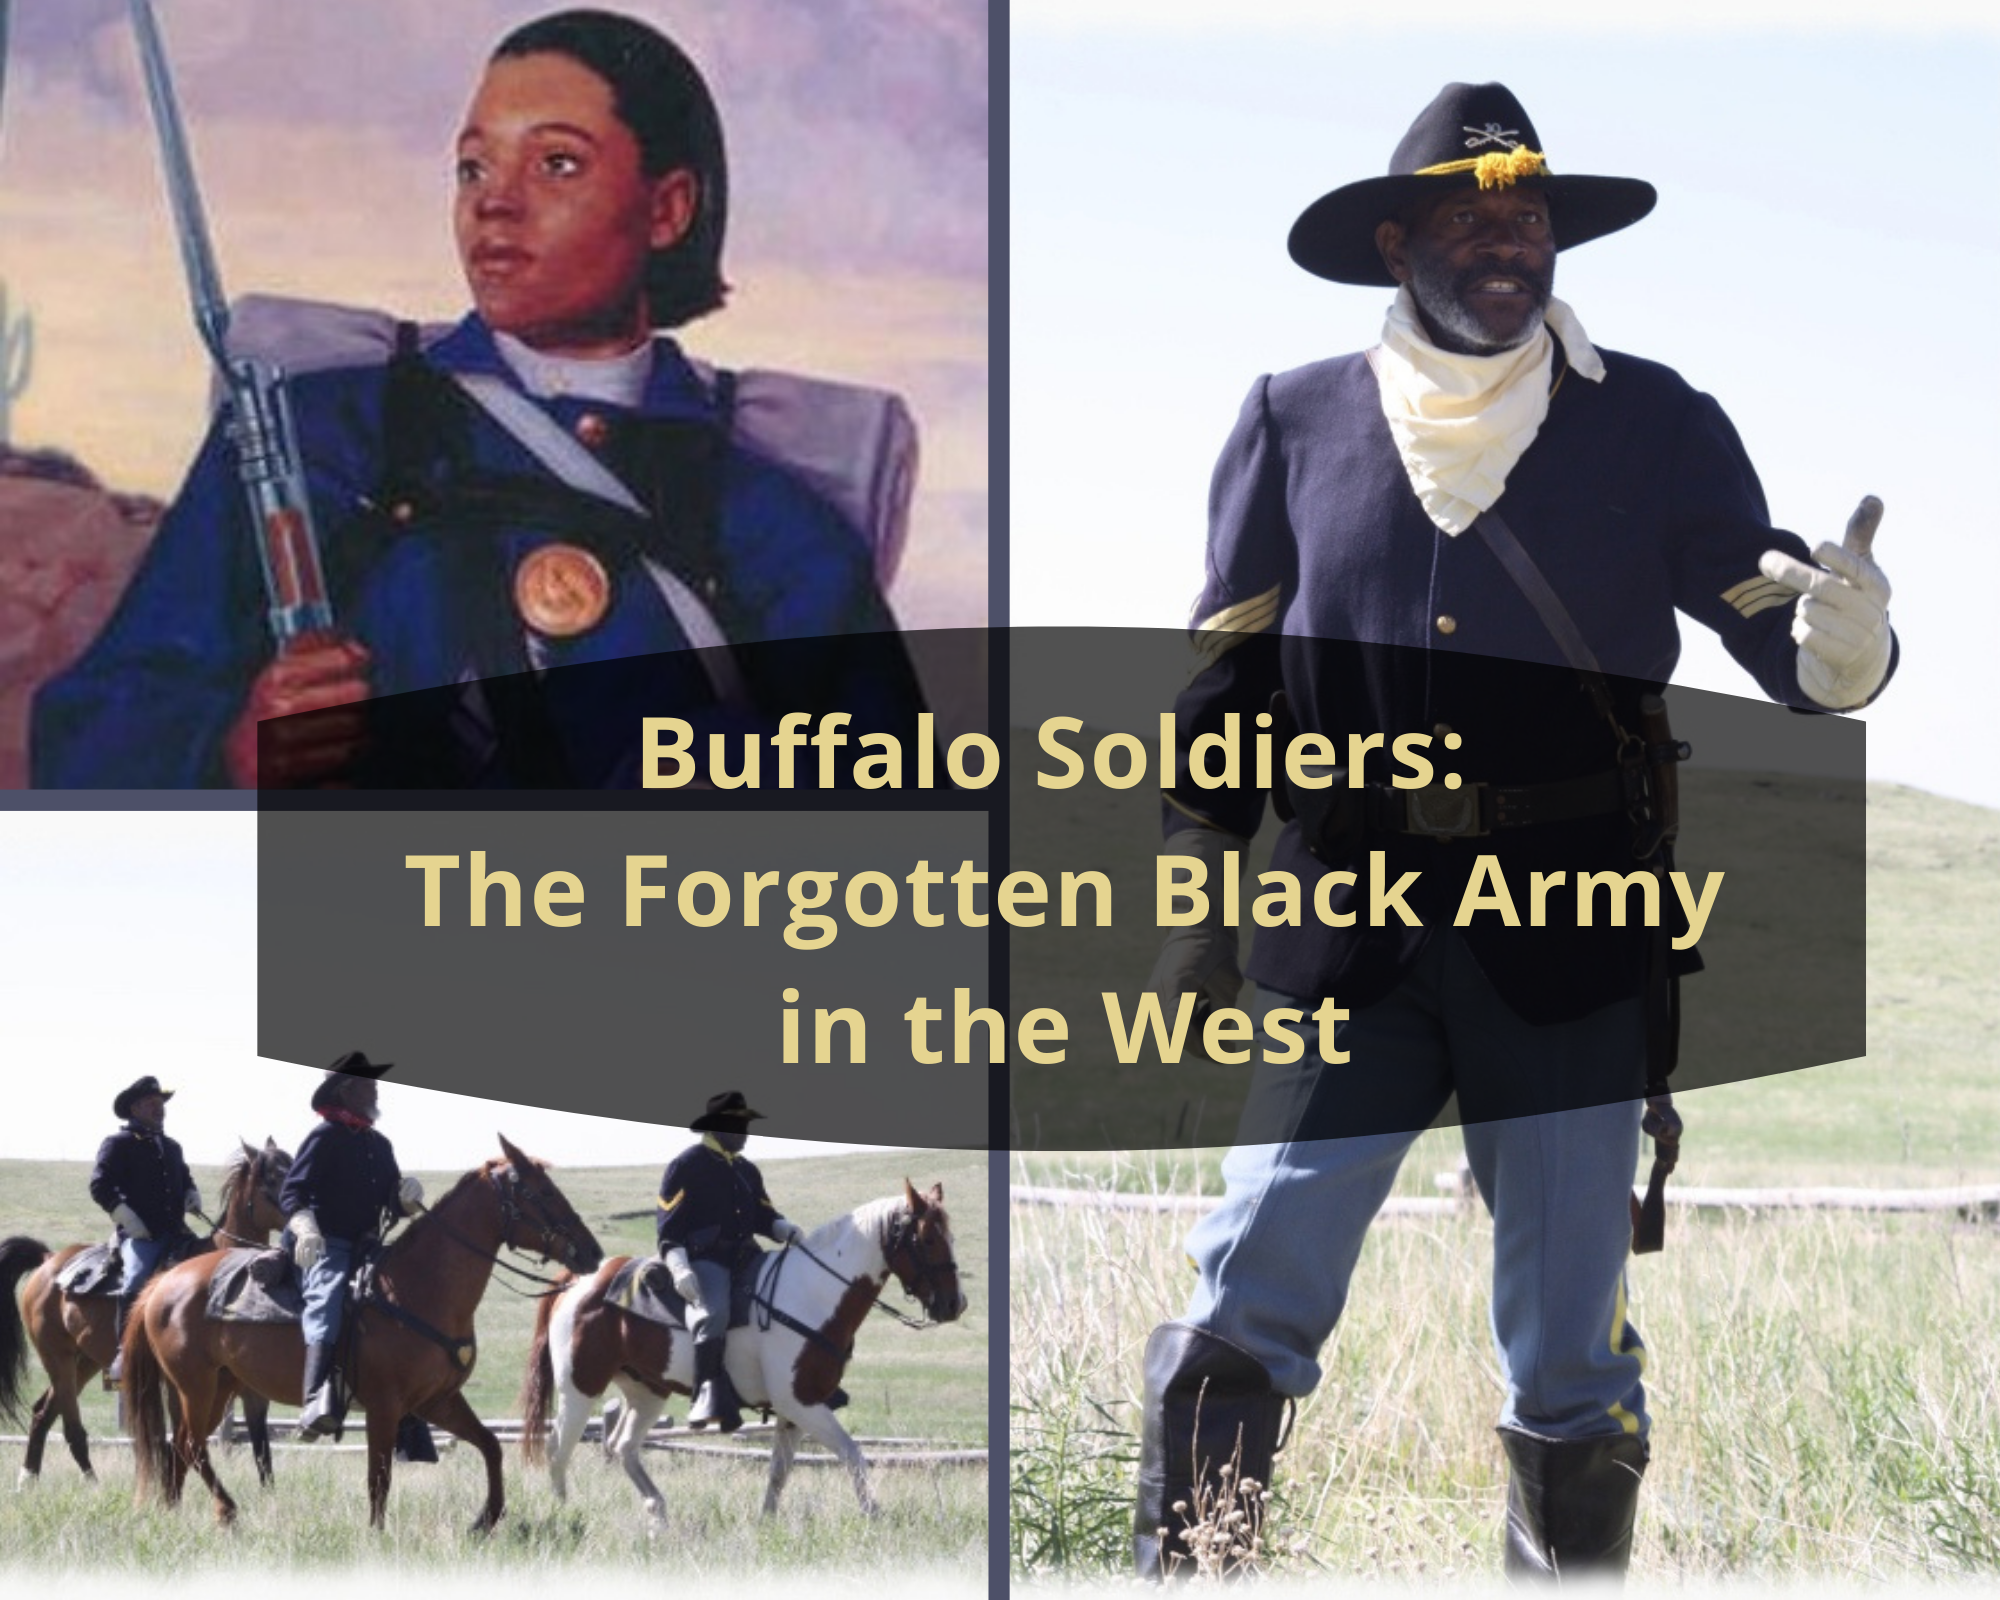 Buffalo Soldiers: The Forgotten Black Army in the West